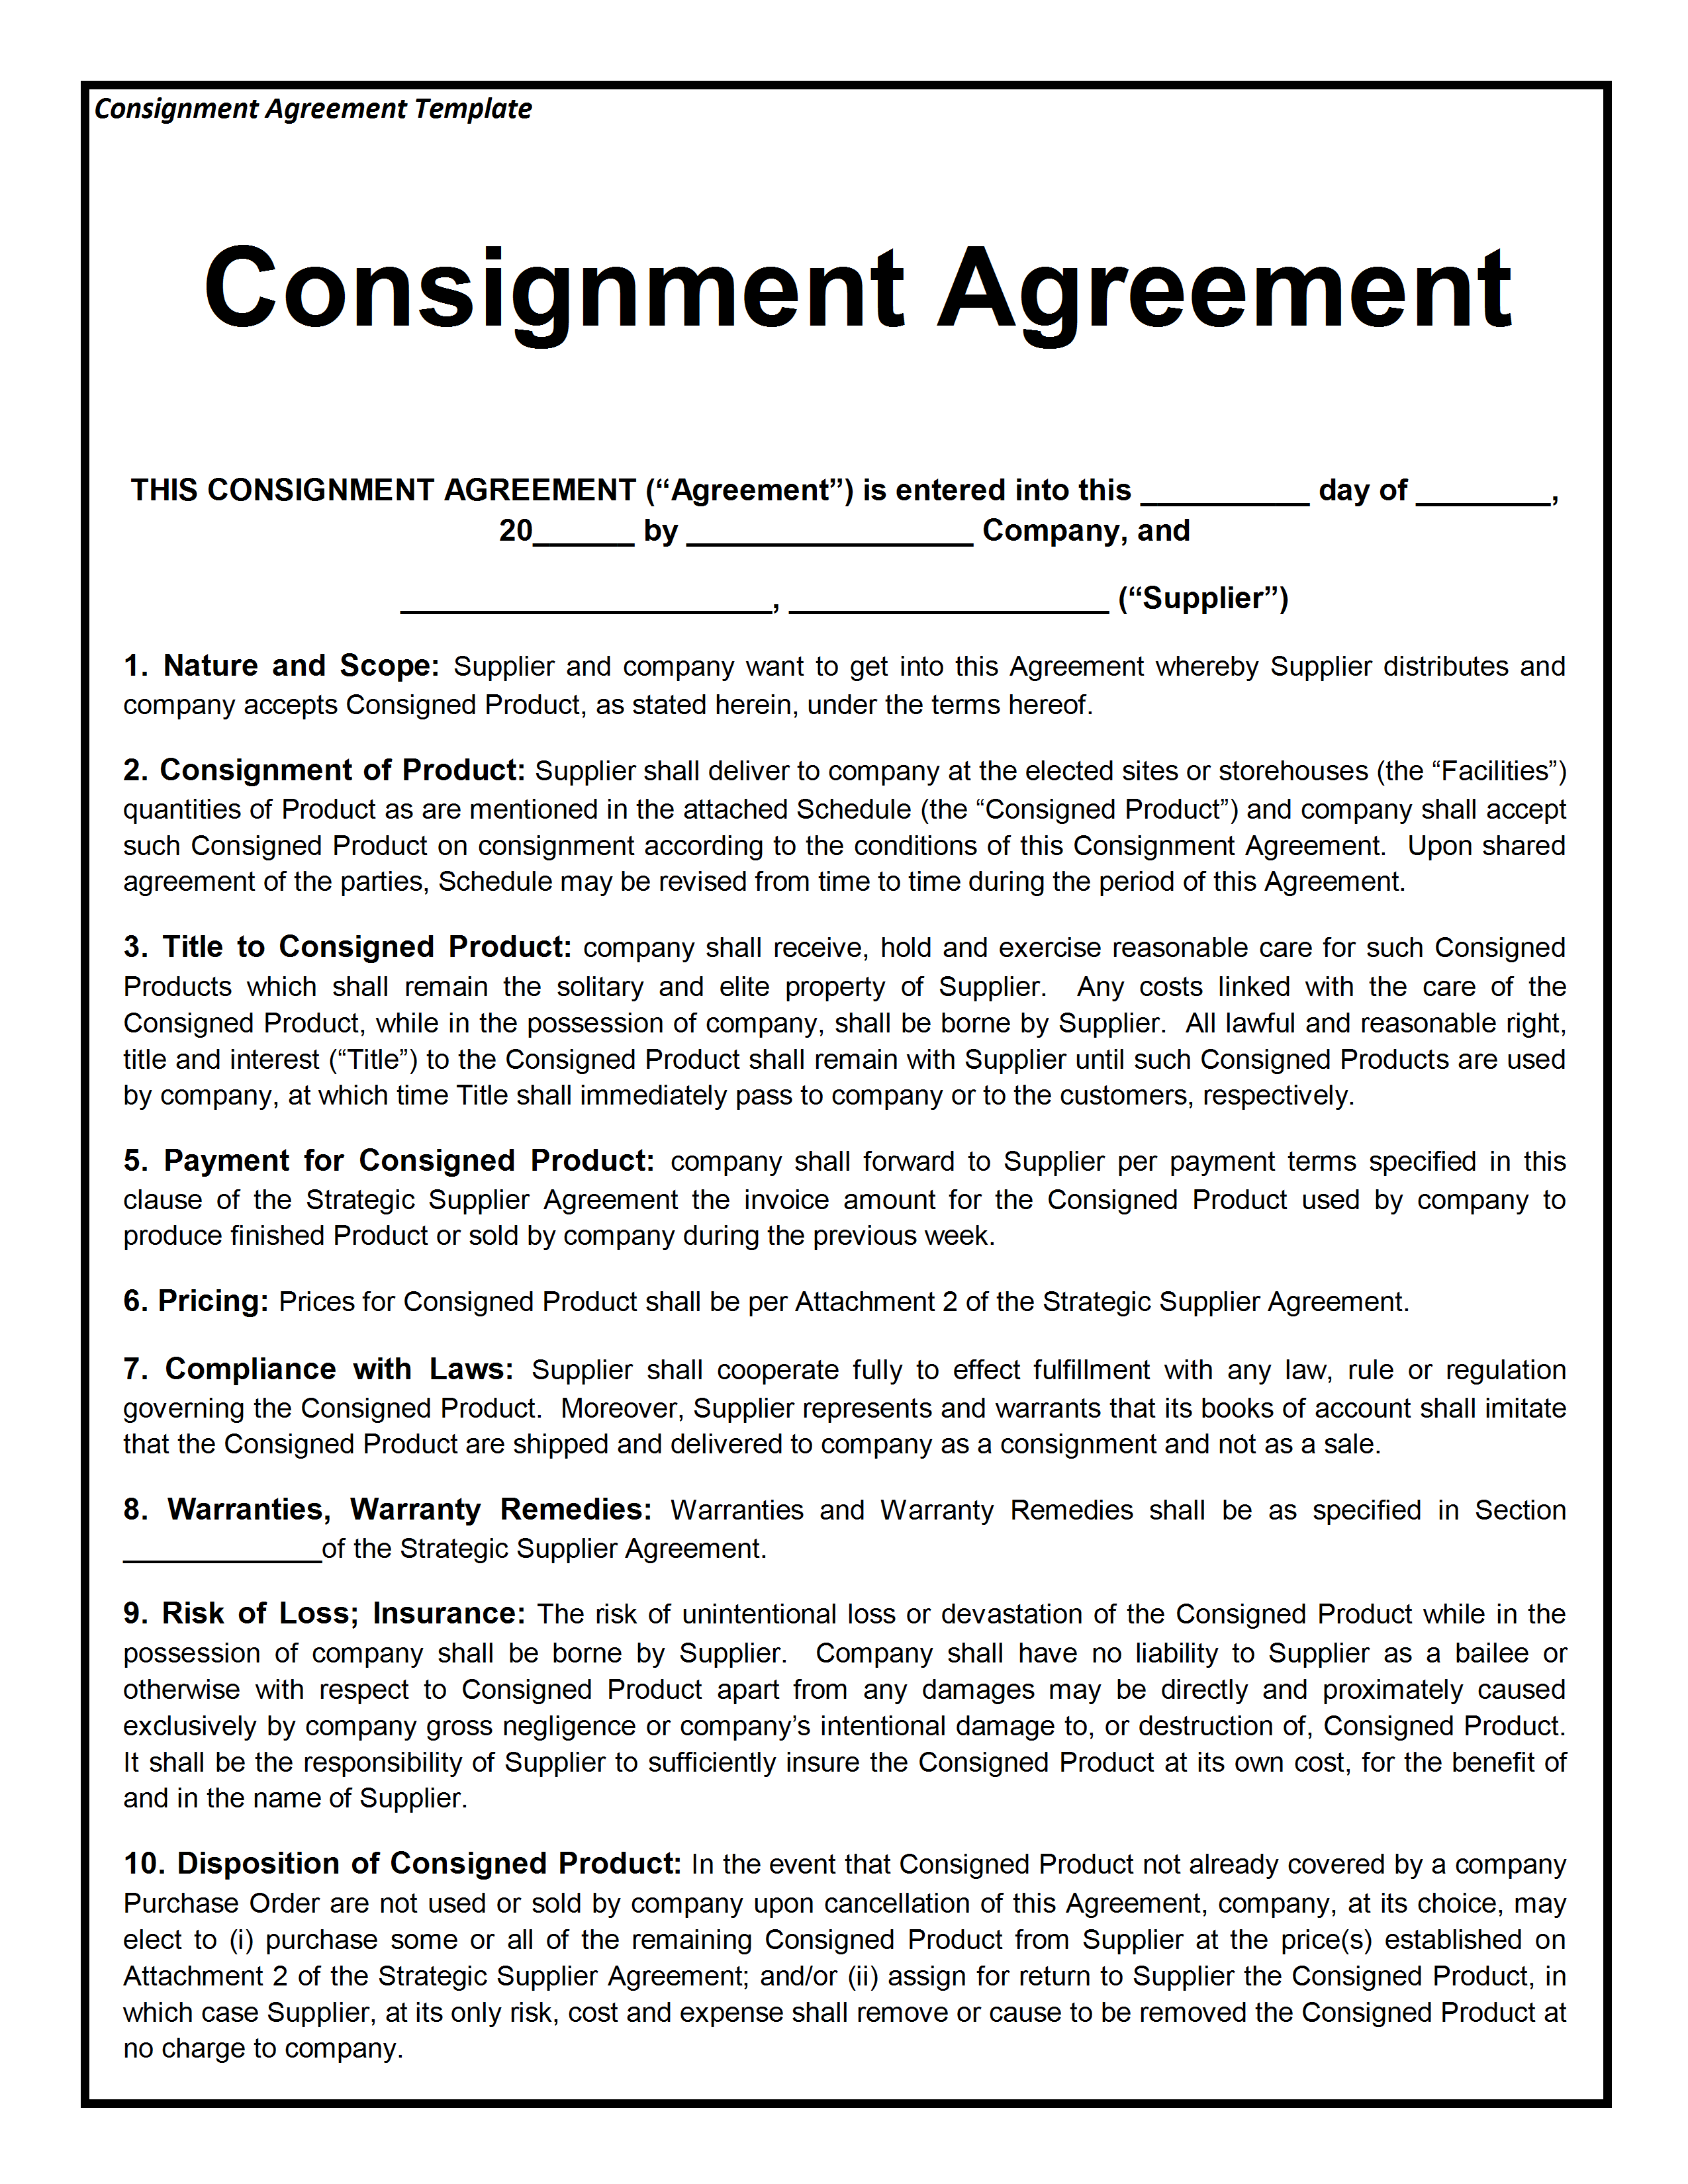 Consignment Agreement Template Word Free